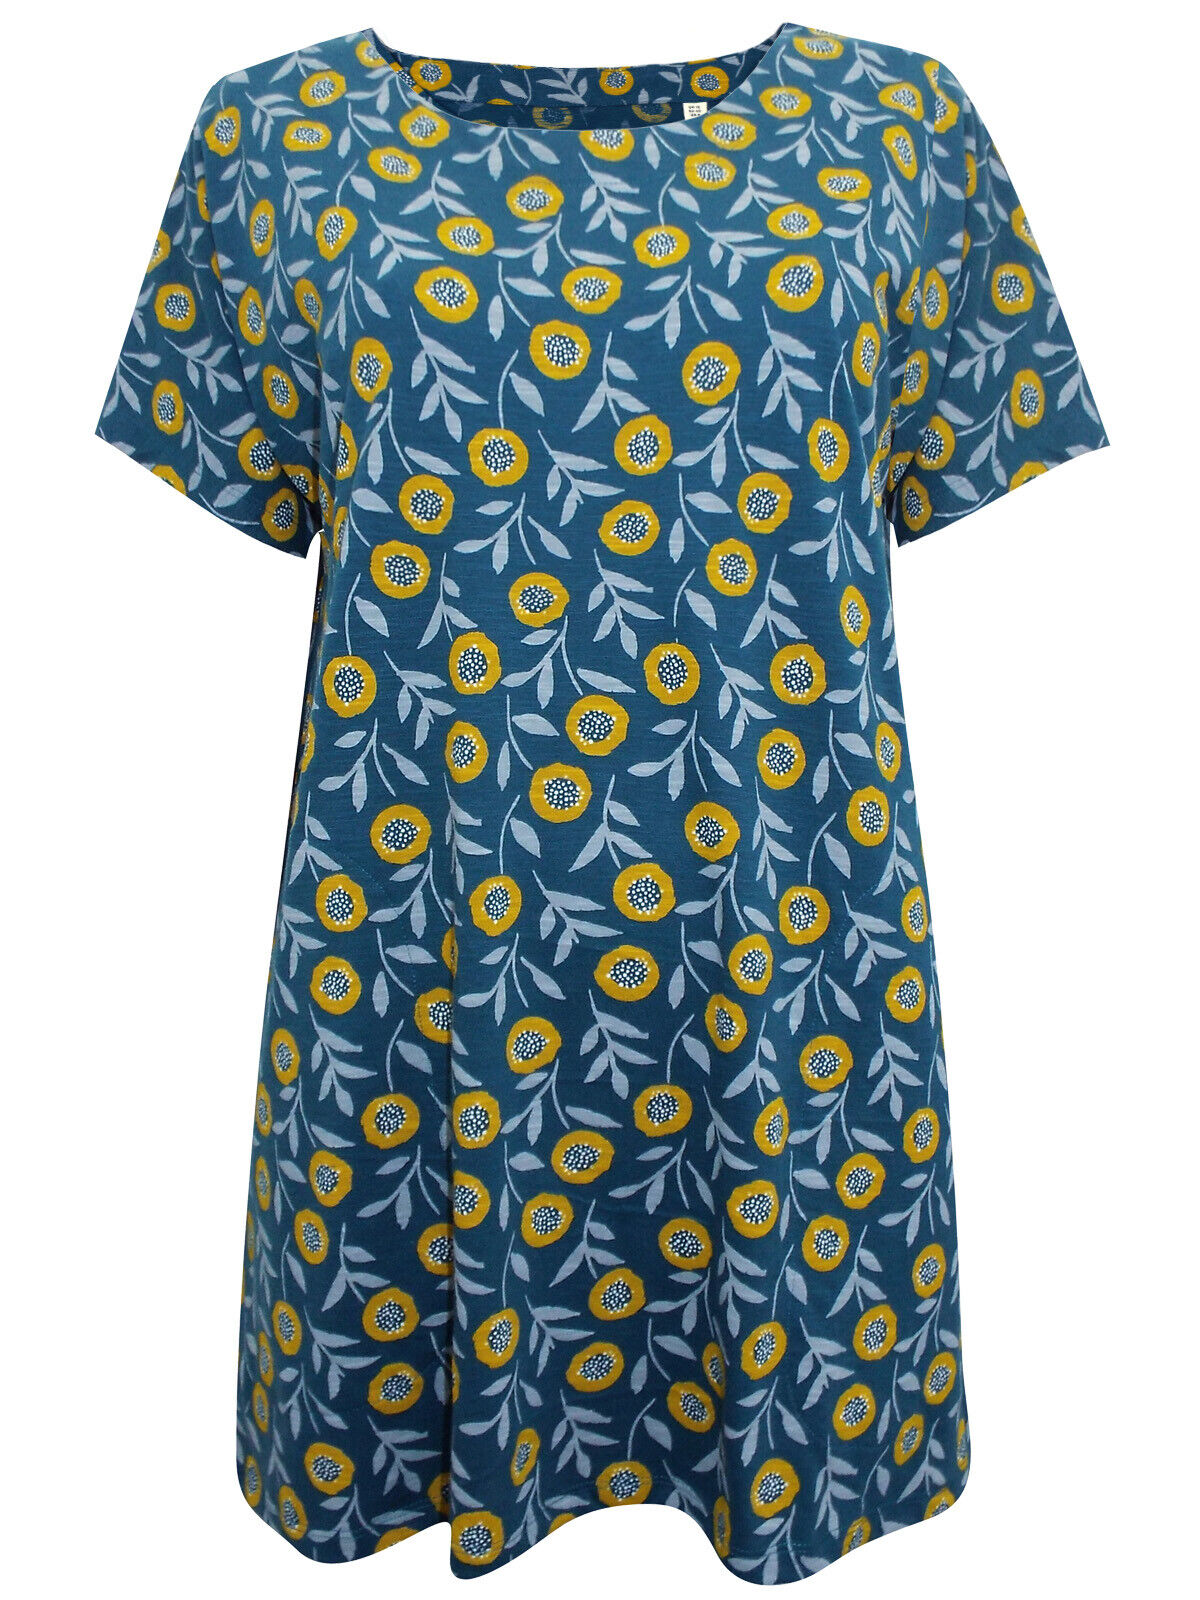 EX SEASALT Teal Dotty Floral Swell Ocean Gaze Tunic in Size 10 RRP £45